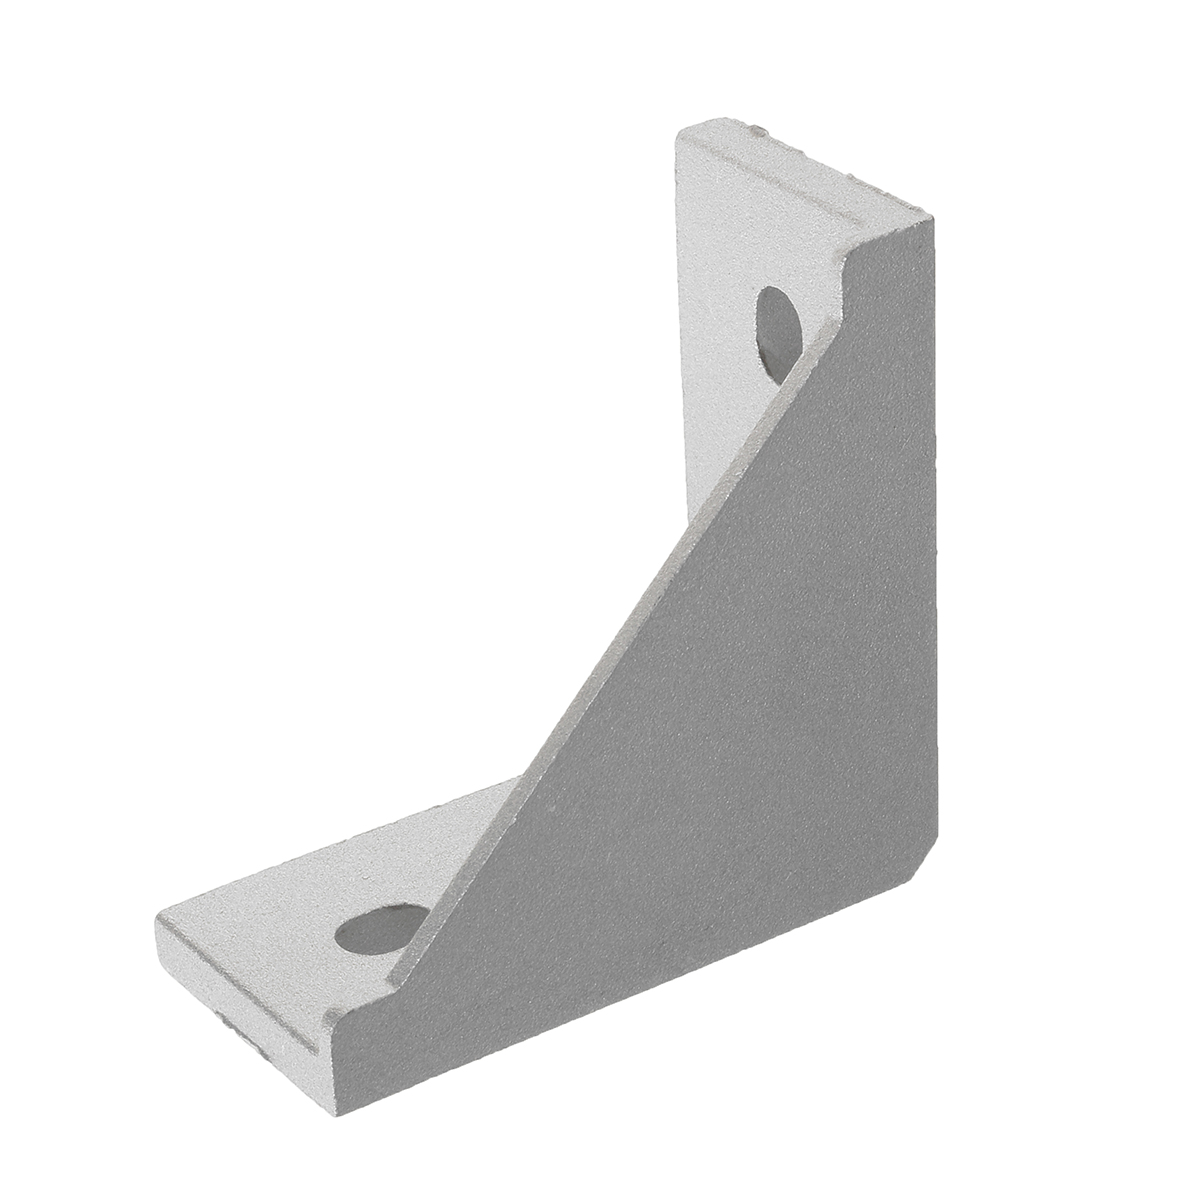 Sulevetrade-AJ40-40times80mm-Aluminum-Angle-Corner-Joint-Connector-90-degrees-4080-Series-Aluminum-P-1293672-4